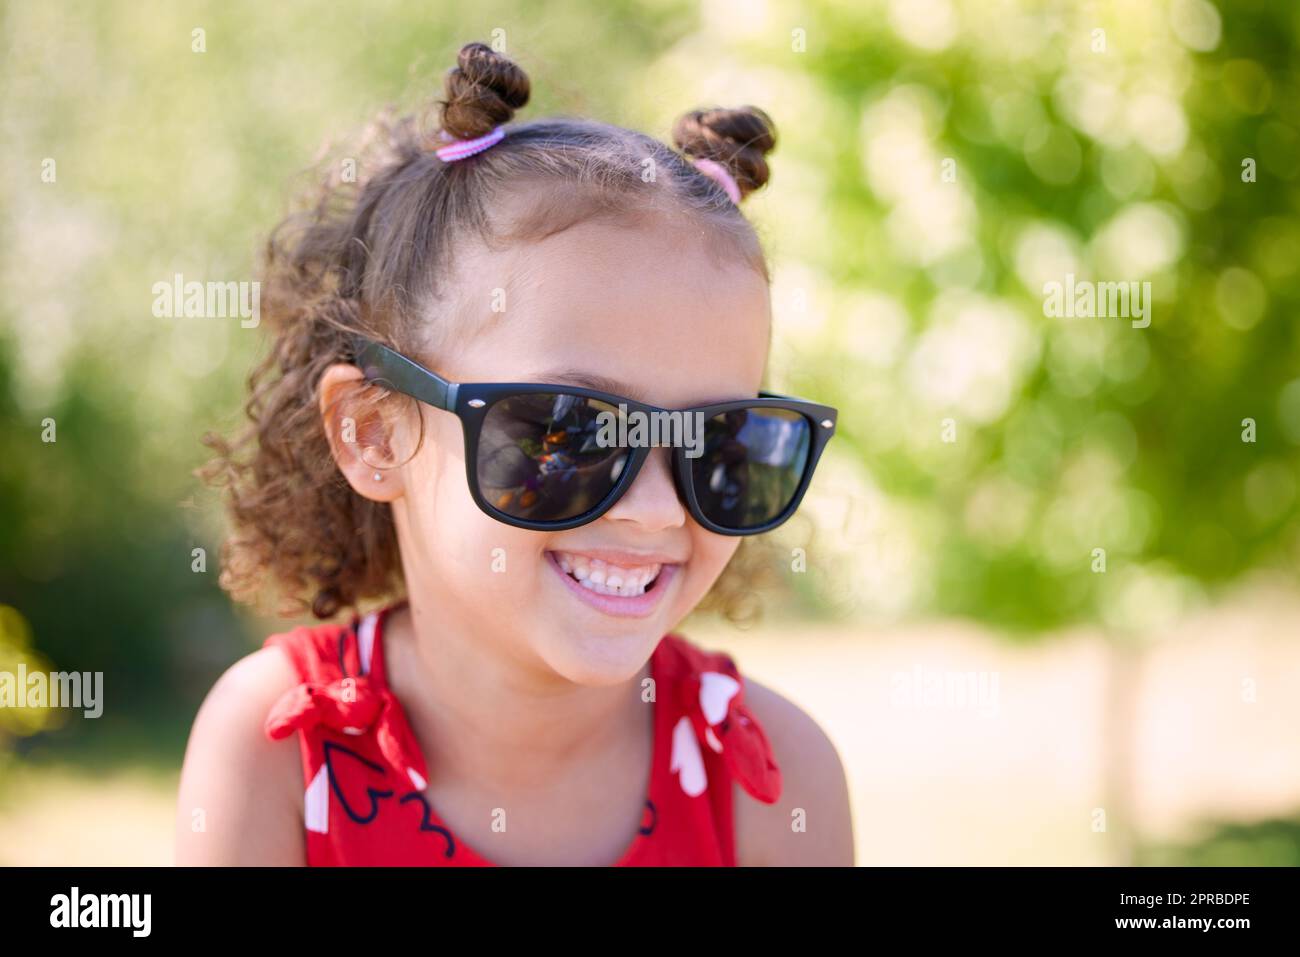 All a girl really needs is a little sunshine. an adorable little girl wearing sunglasses while at the park. Stock Photo